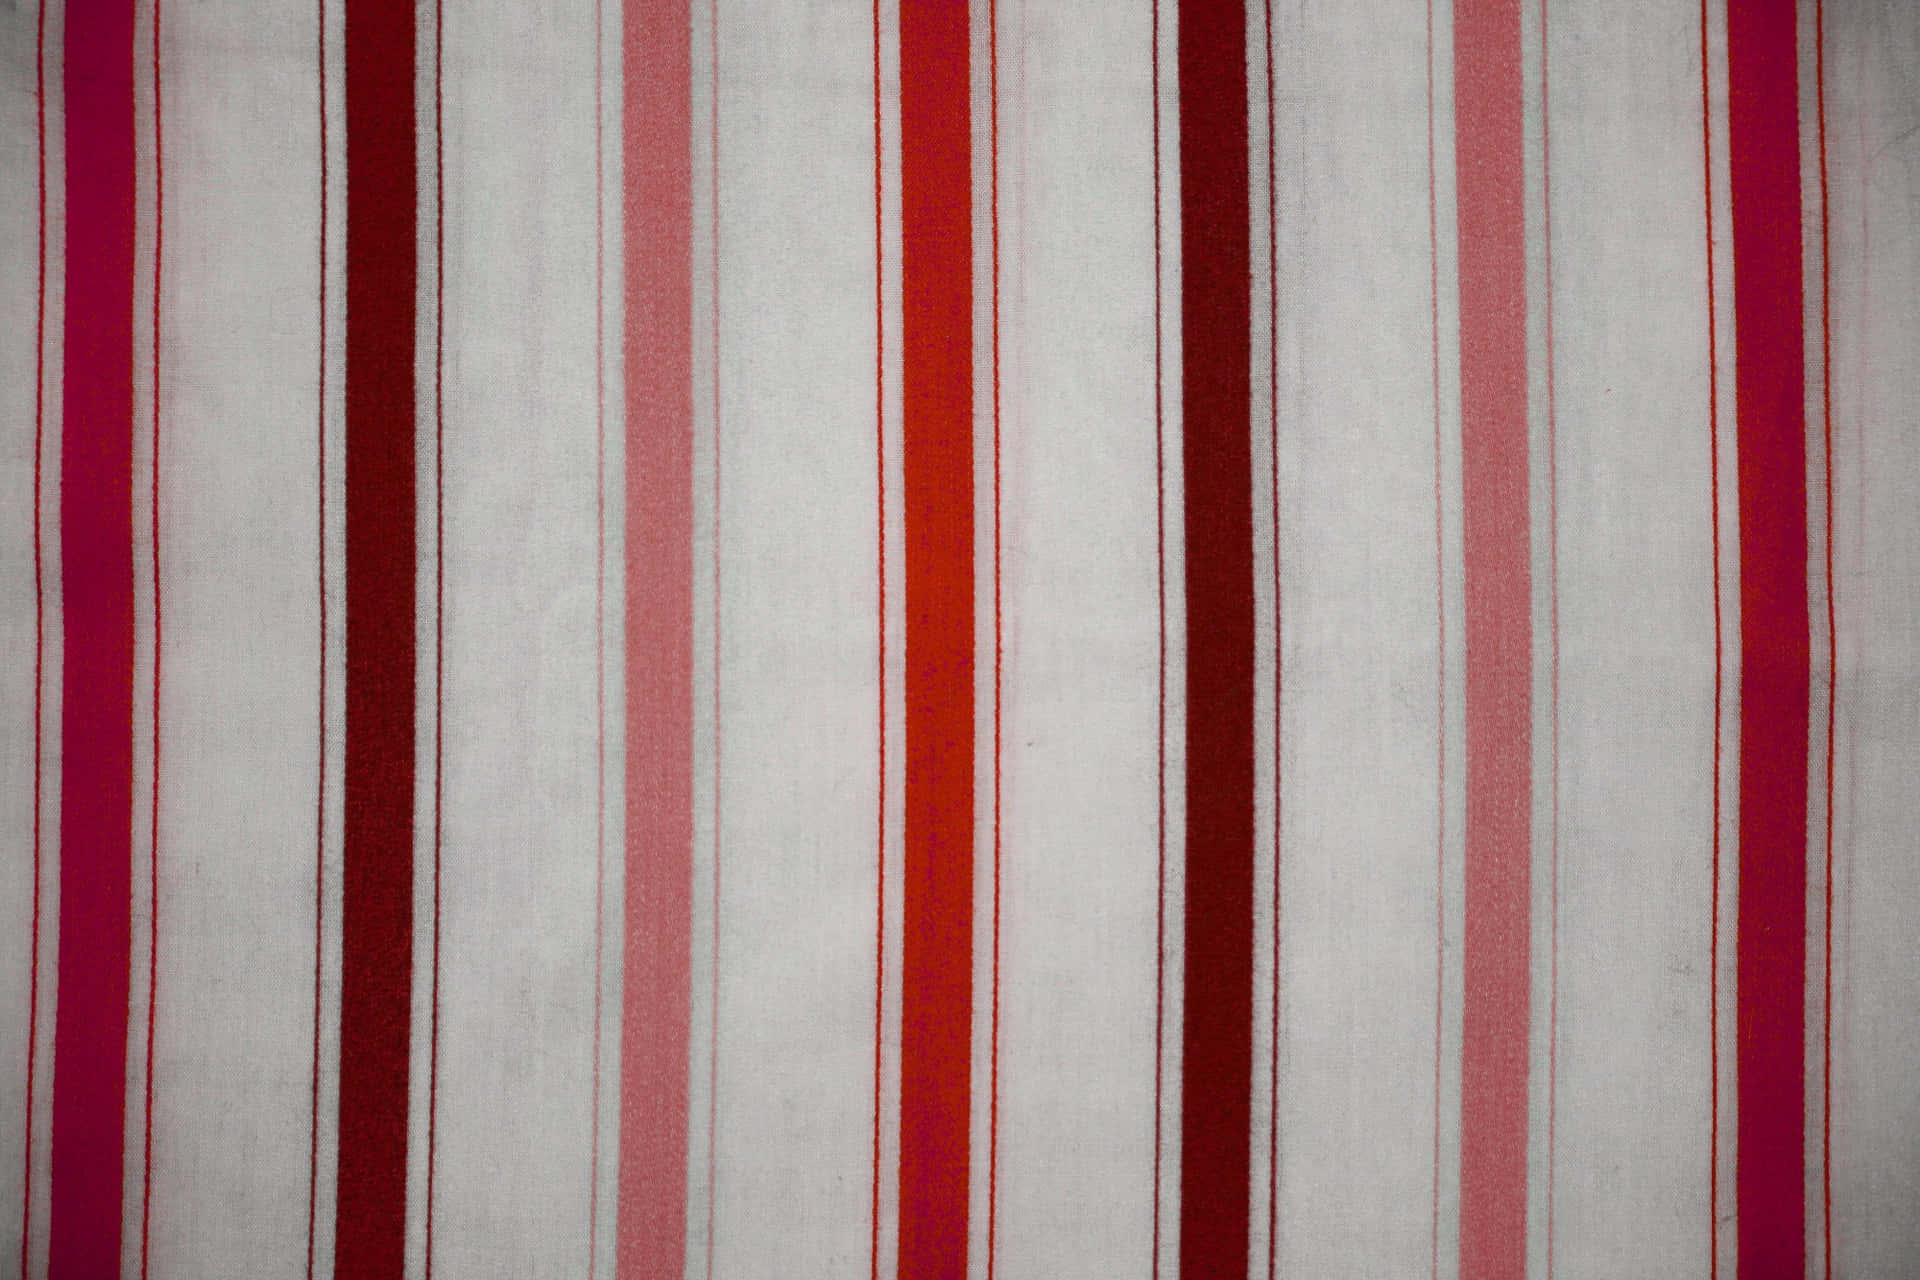 Fabric Texture Picture Vertical Red Pink Brown